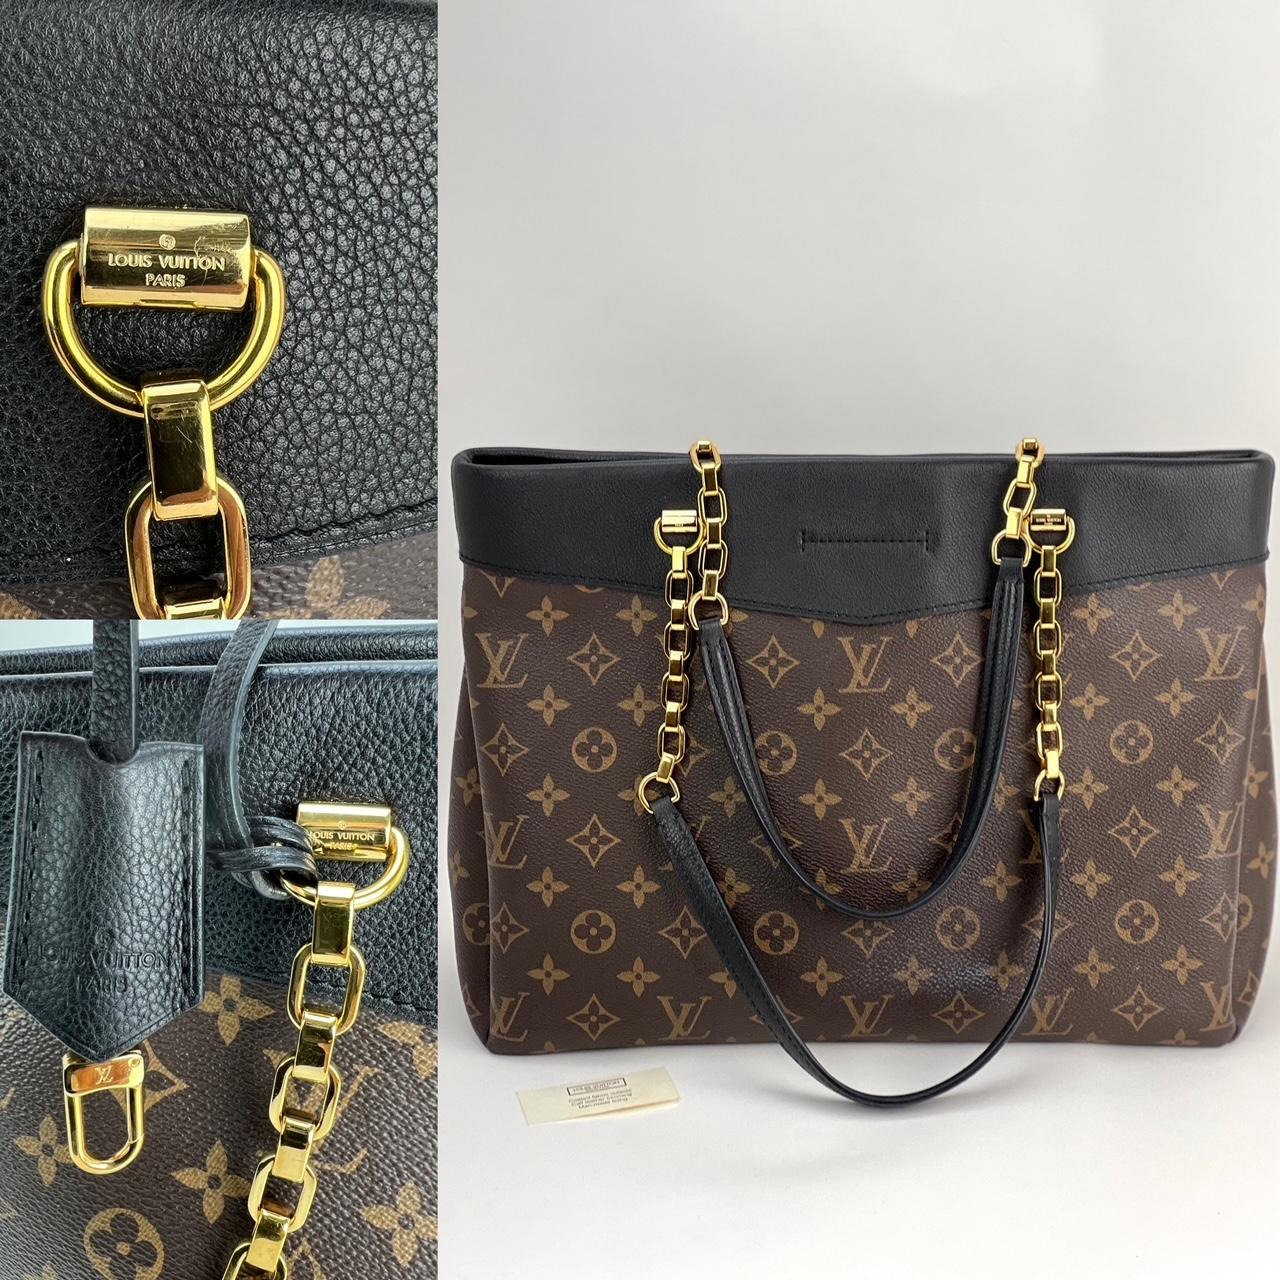 Pre-Owned  100% Authentic
LOUIS VUITTON Pallas Chain Monogram
Shopper Tote Black
RATING: A/B...Very Good, well maintained, 
shows minor signs of wear
MATERIAL: monogram canvas, leather trim
HANDLE:  double leather and chain
DROP: 10''
COLOR: brown,